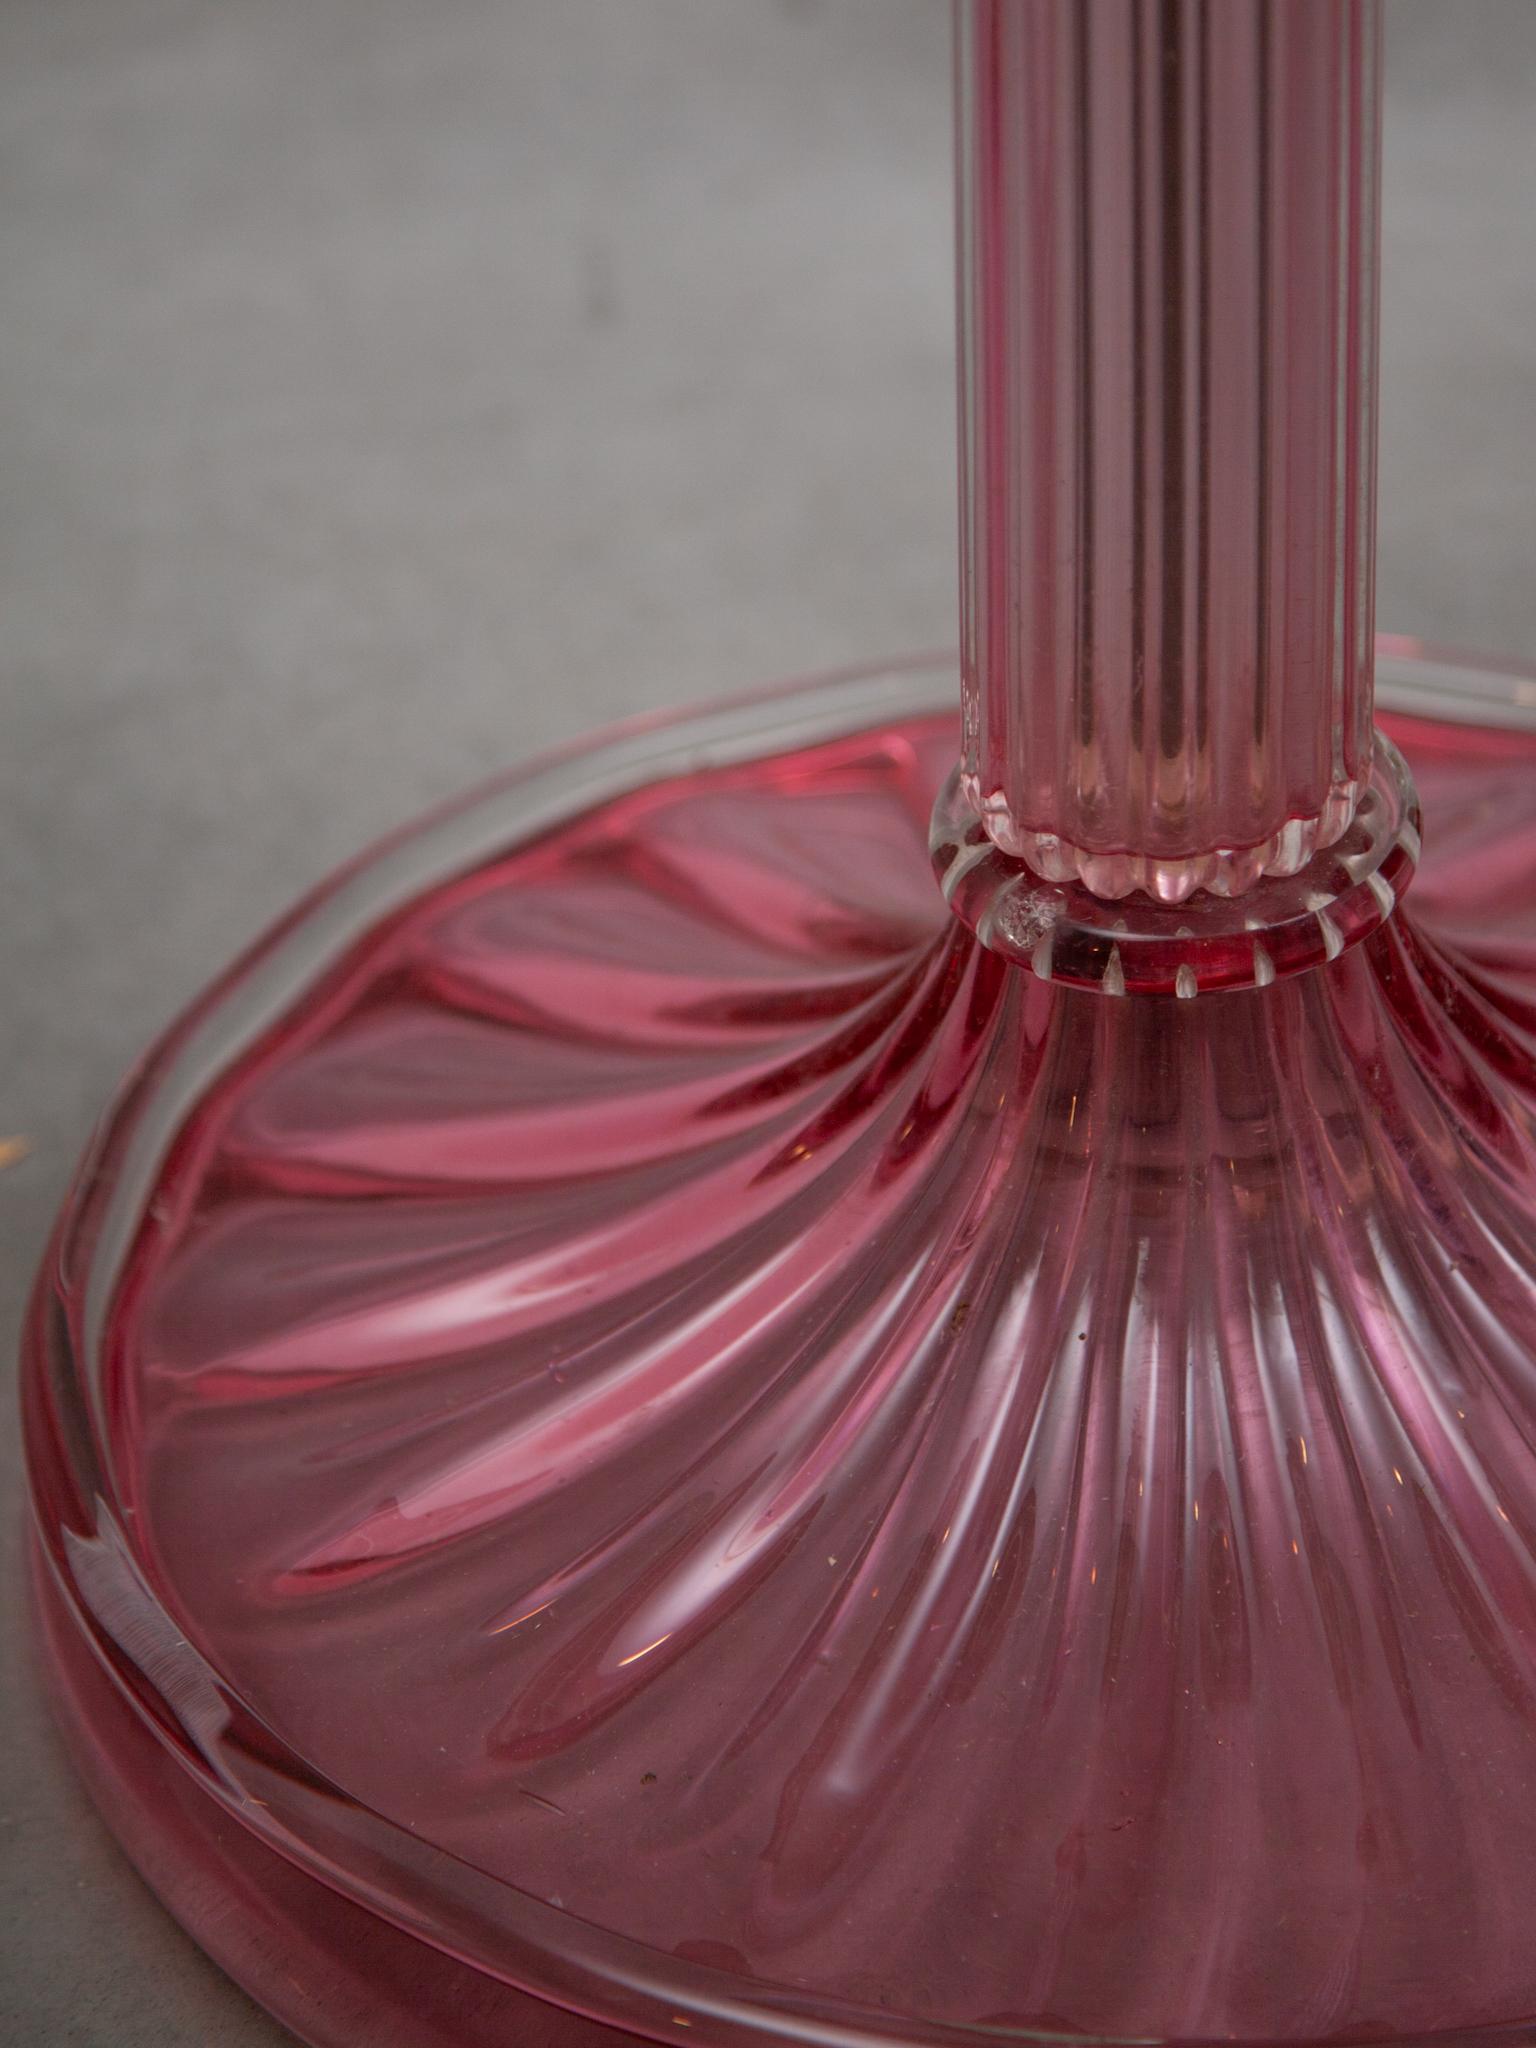 Barovier e Tosso Pink Art Glass Floor Lamp, Murano Blown Glass, 1950s, Italy For Sale 2